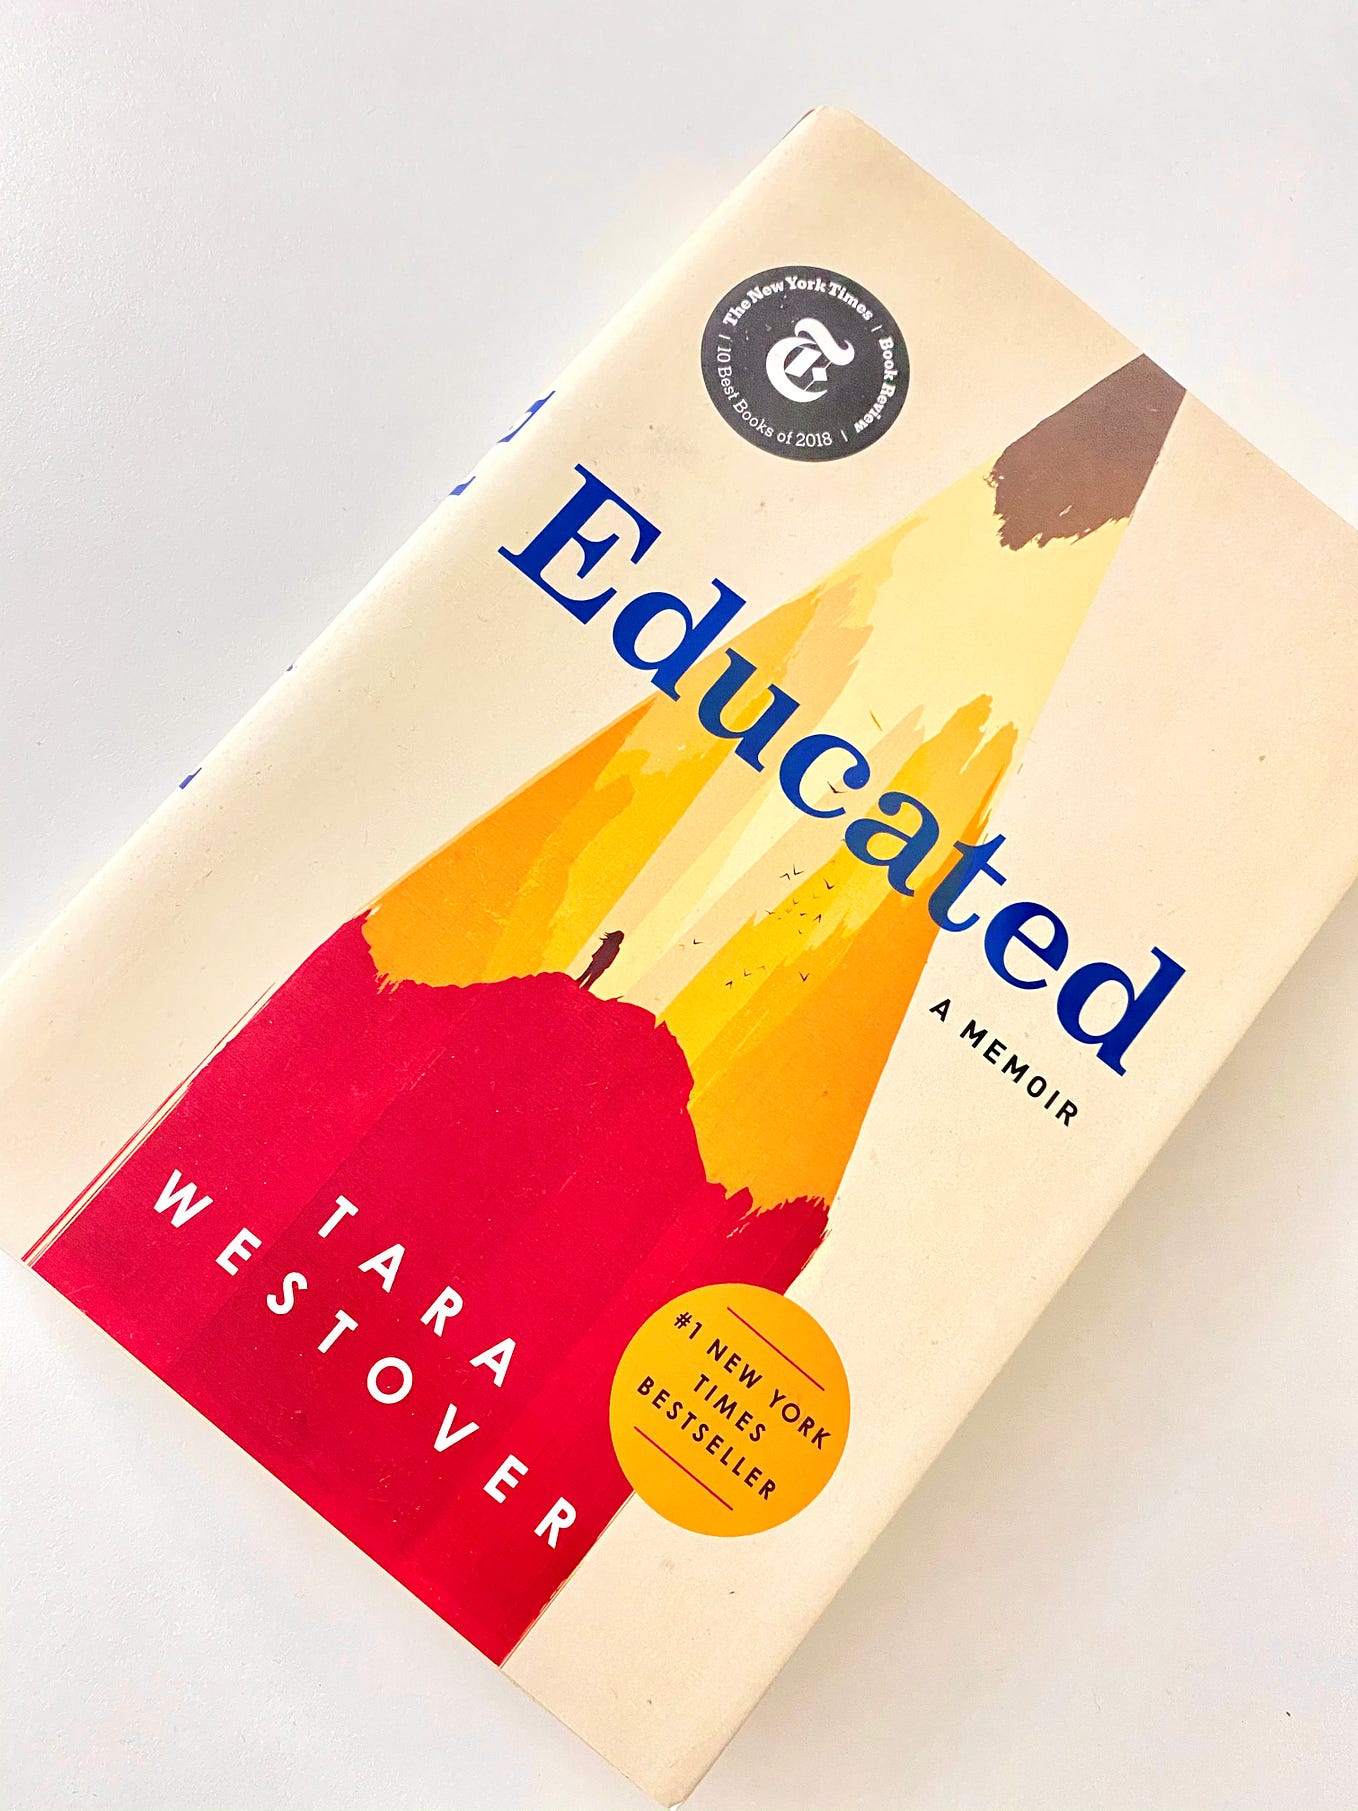 Reflections on Educated by Tara Westover